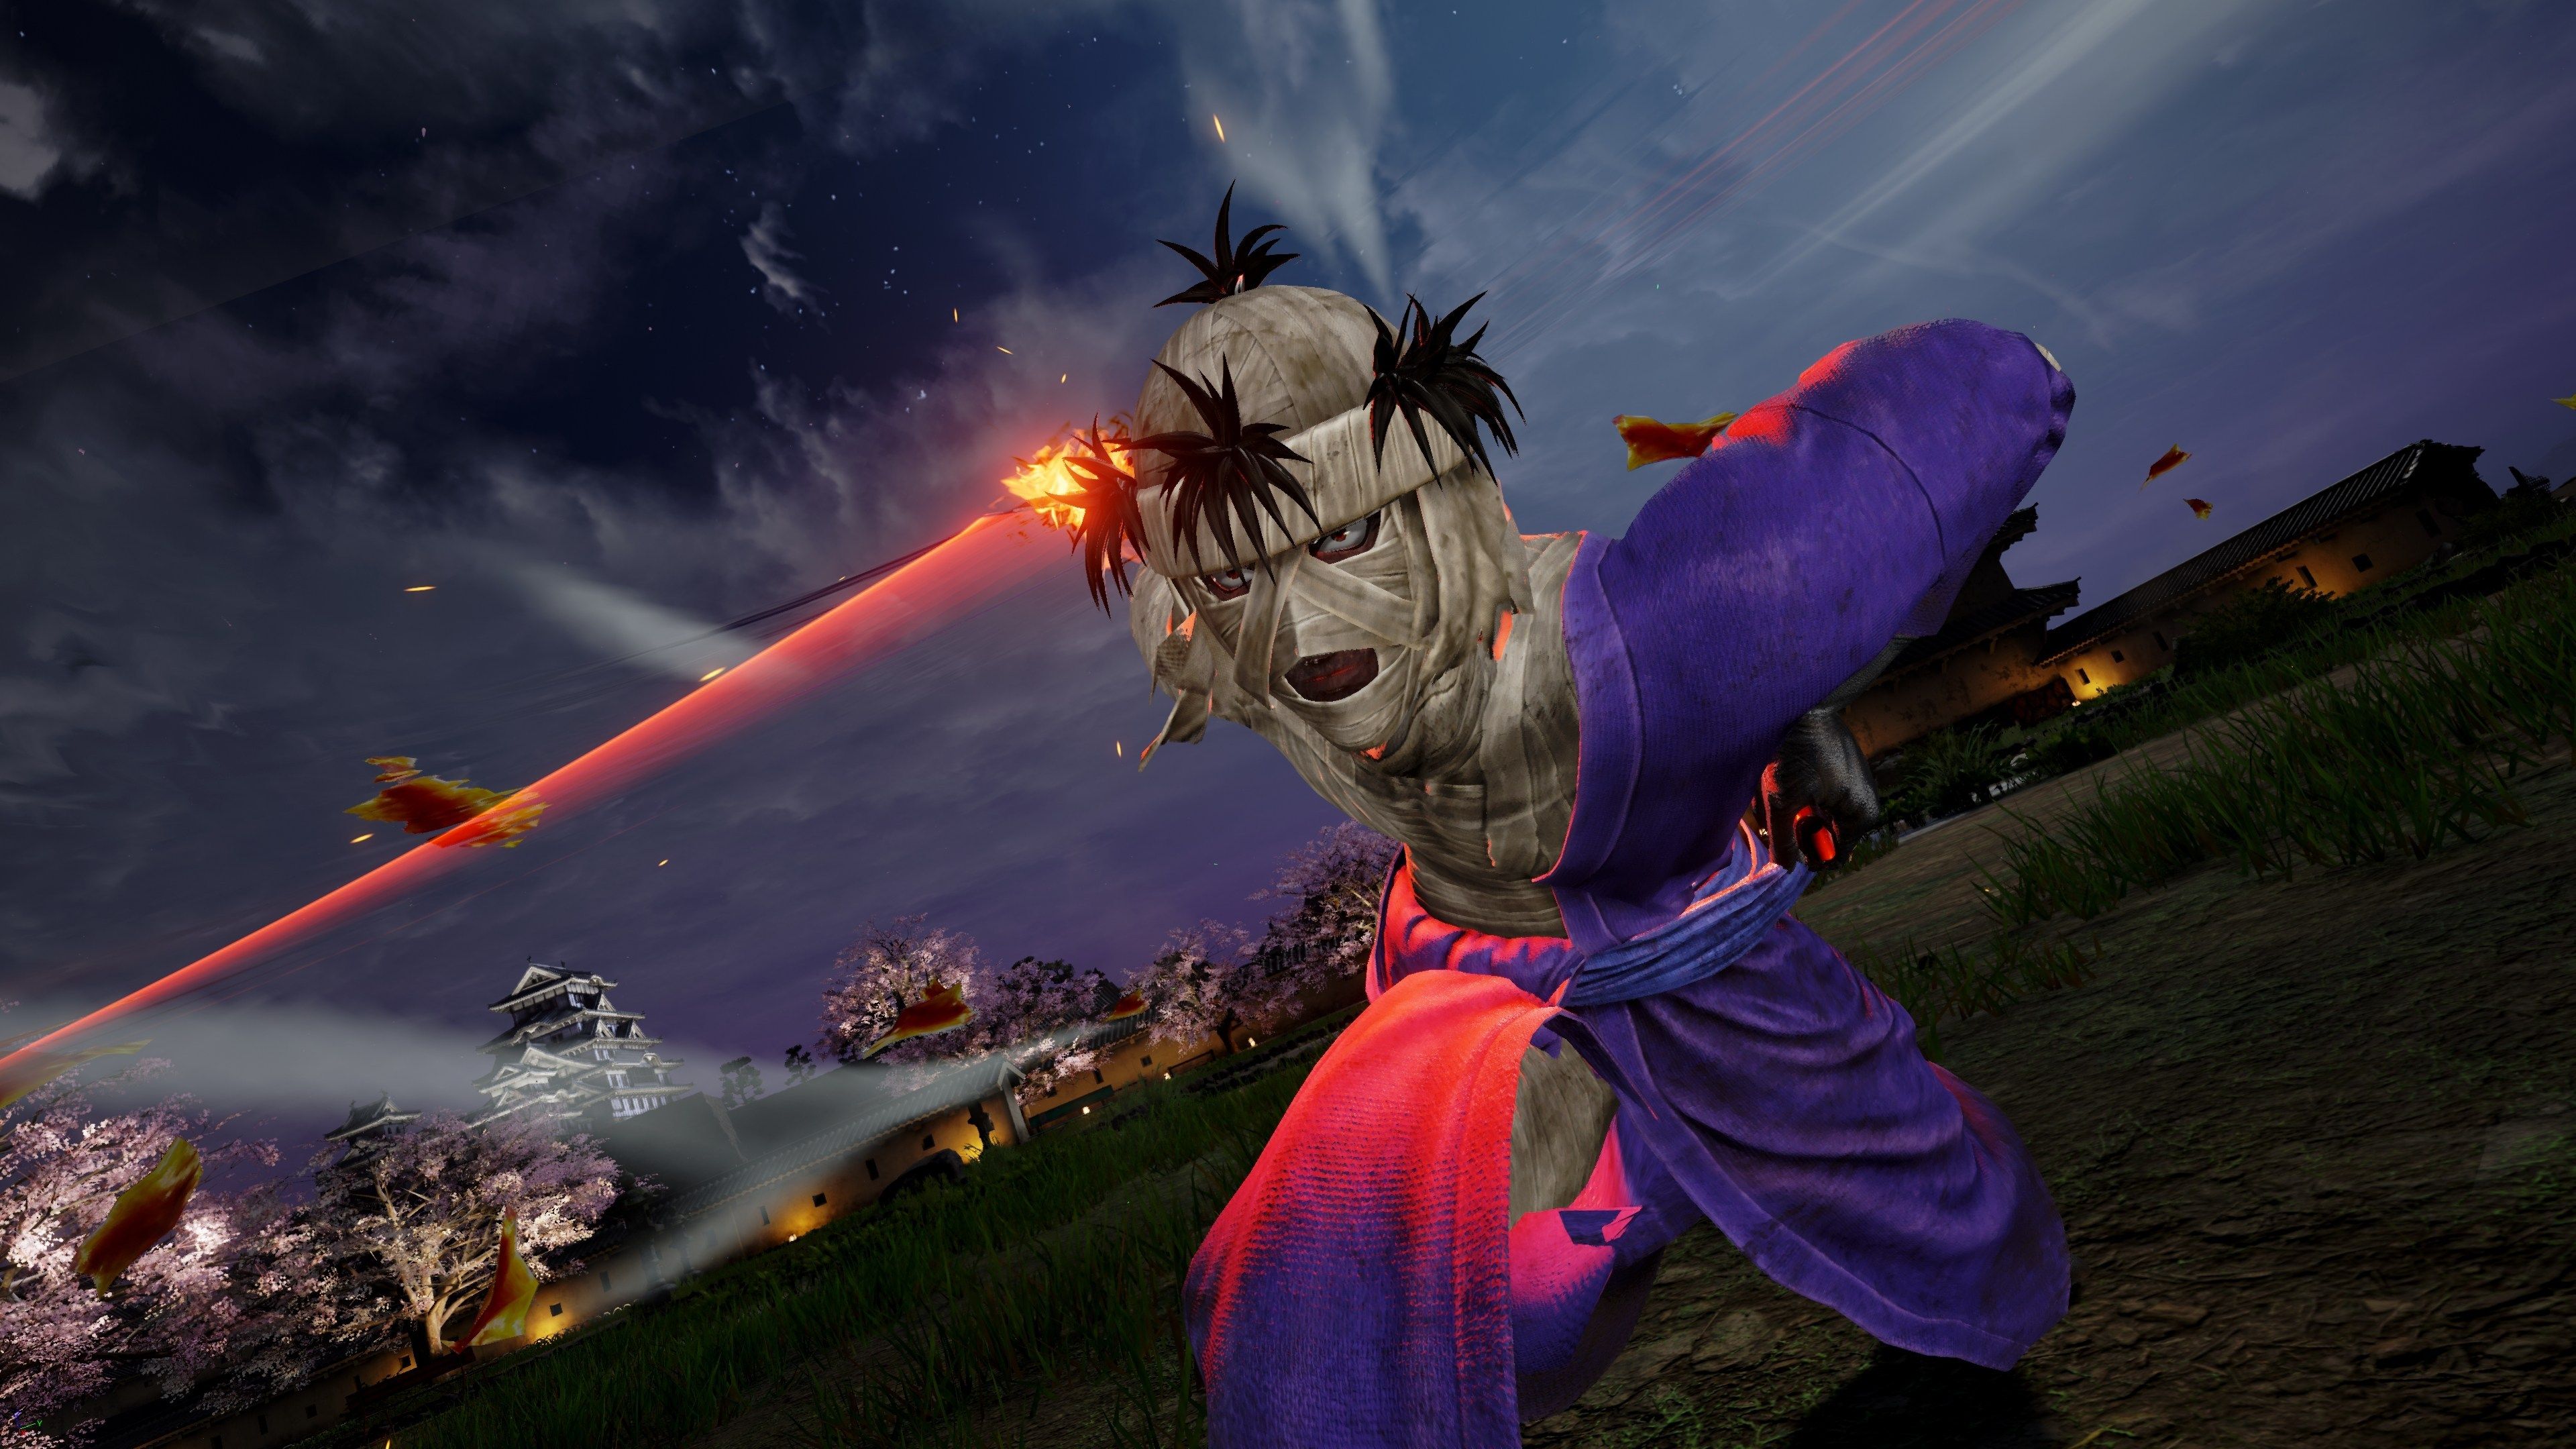 Jump Force The 10 Most Powerful Fighters Ranked